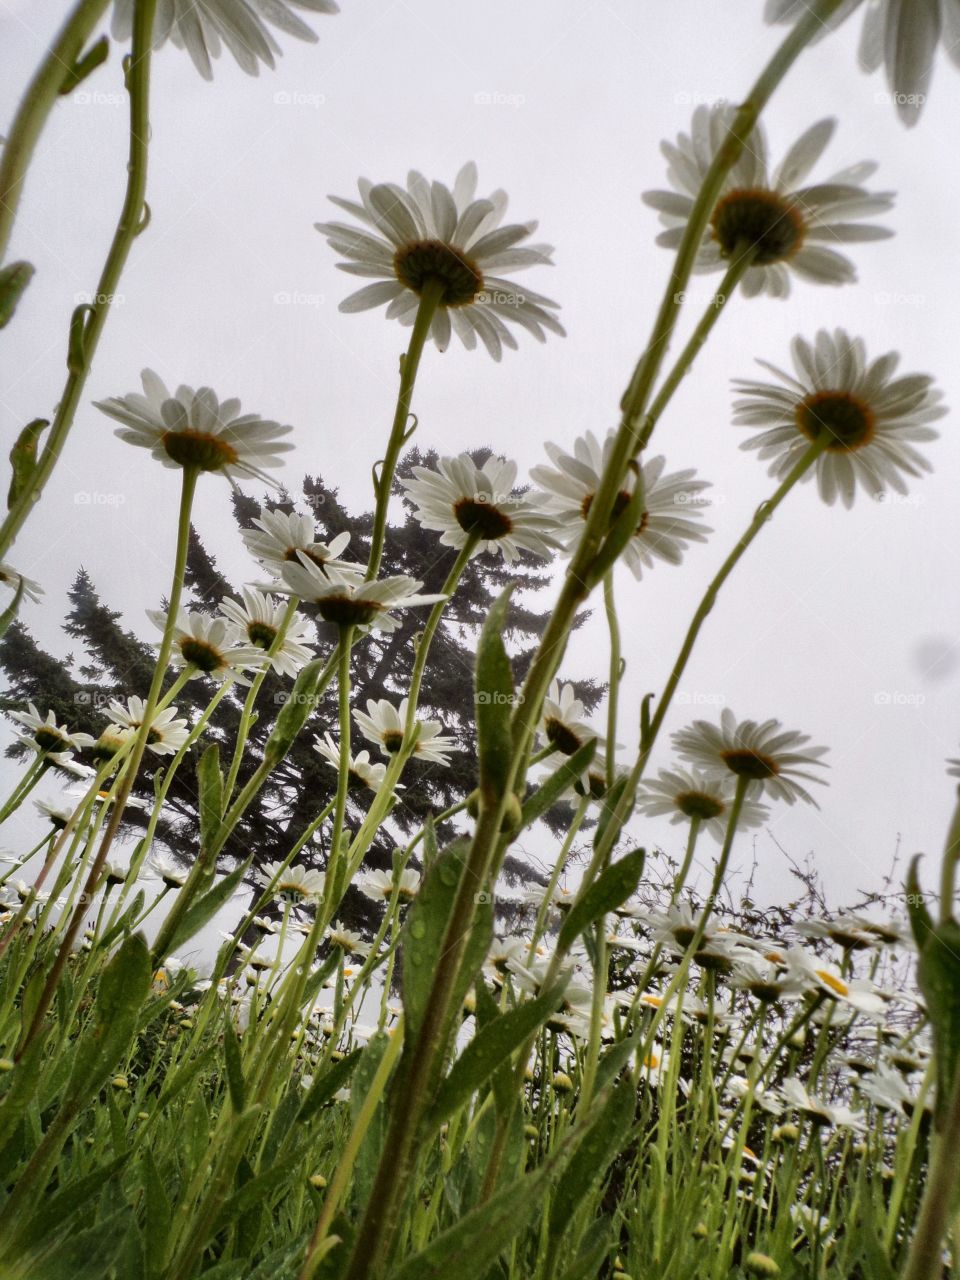 Looking up into daisies 